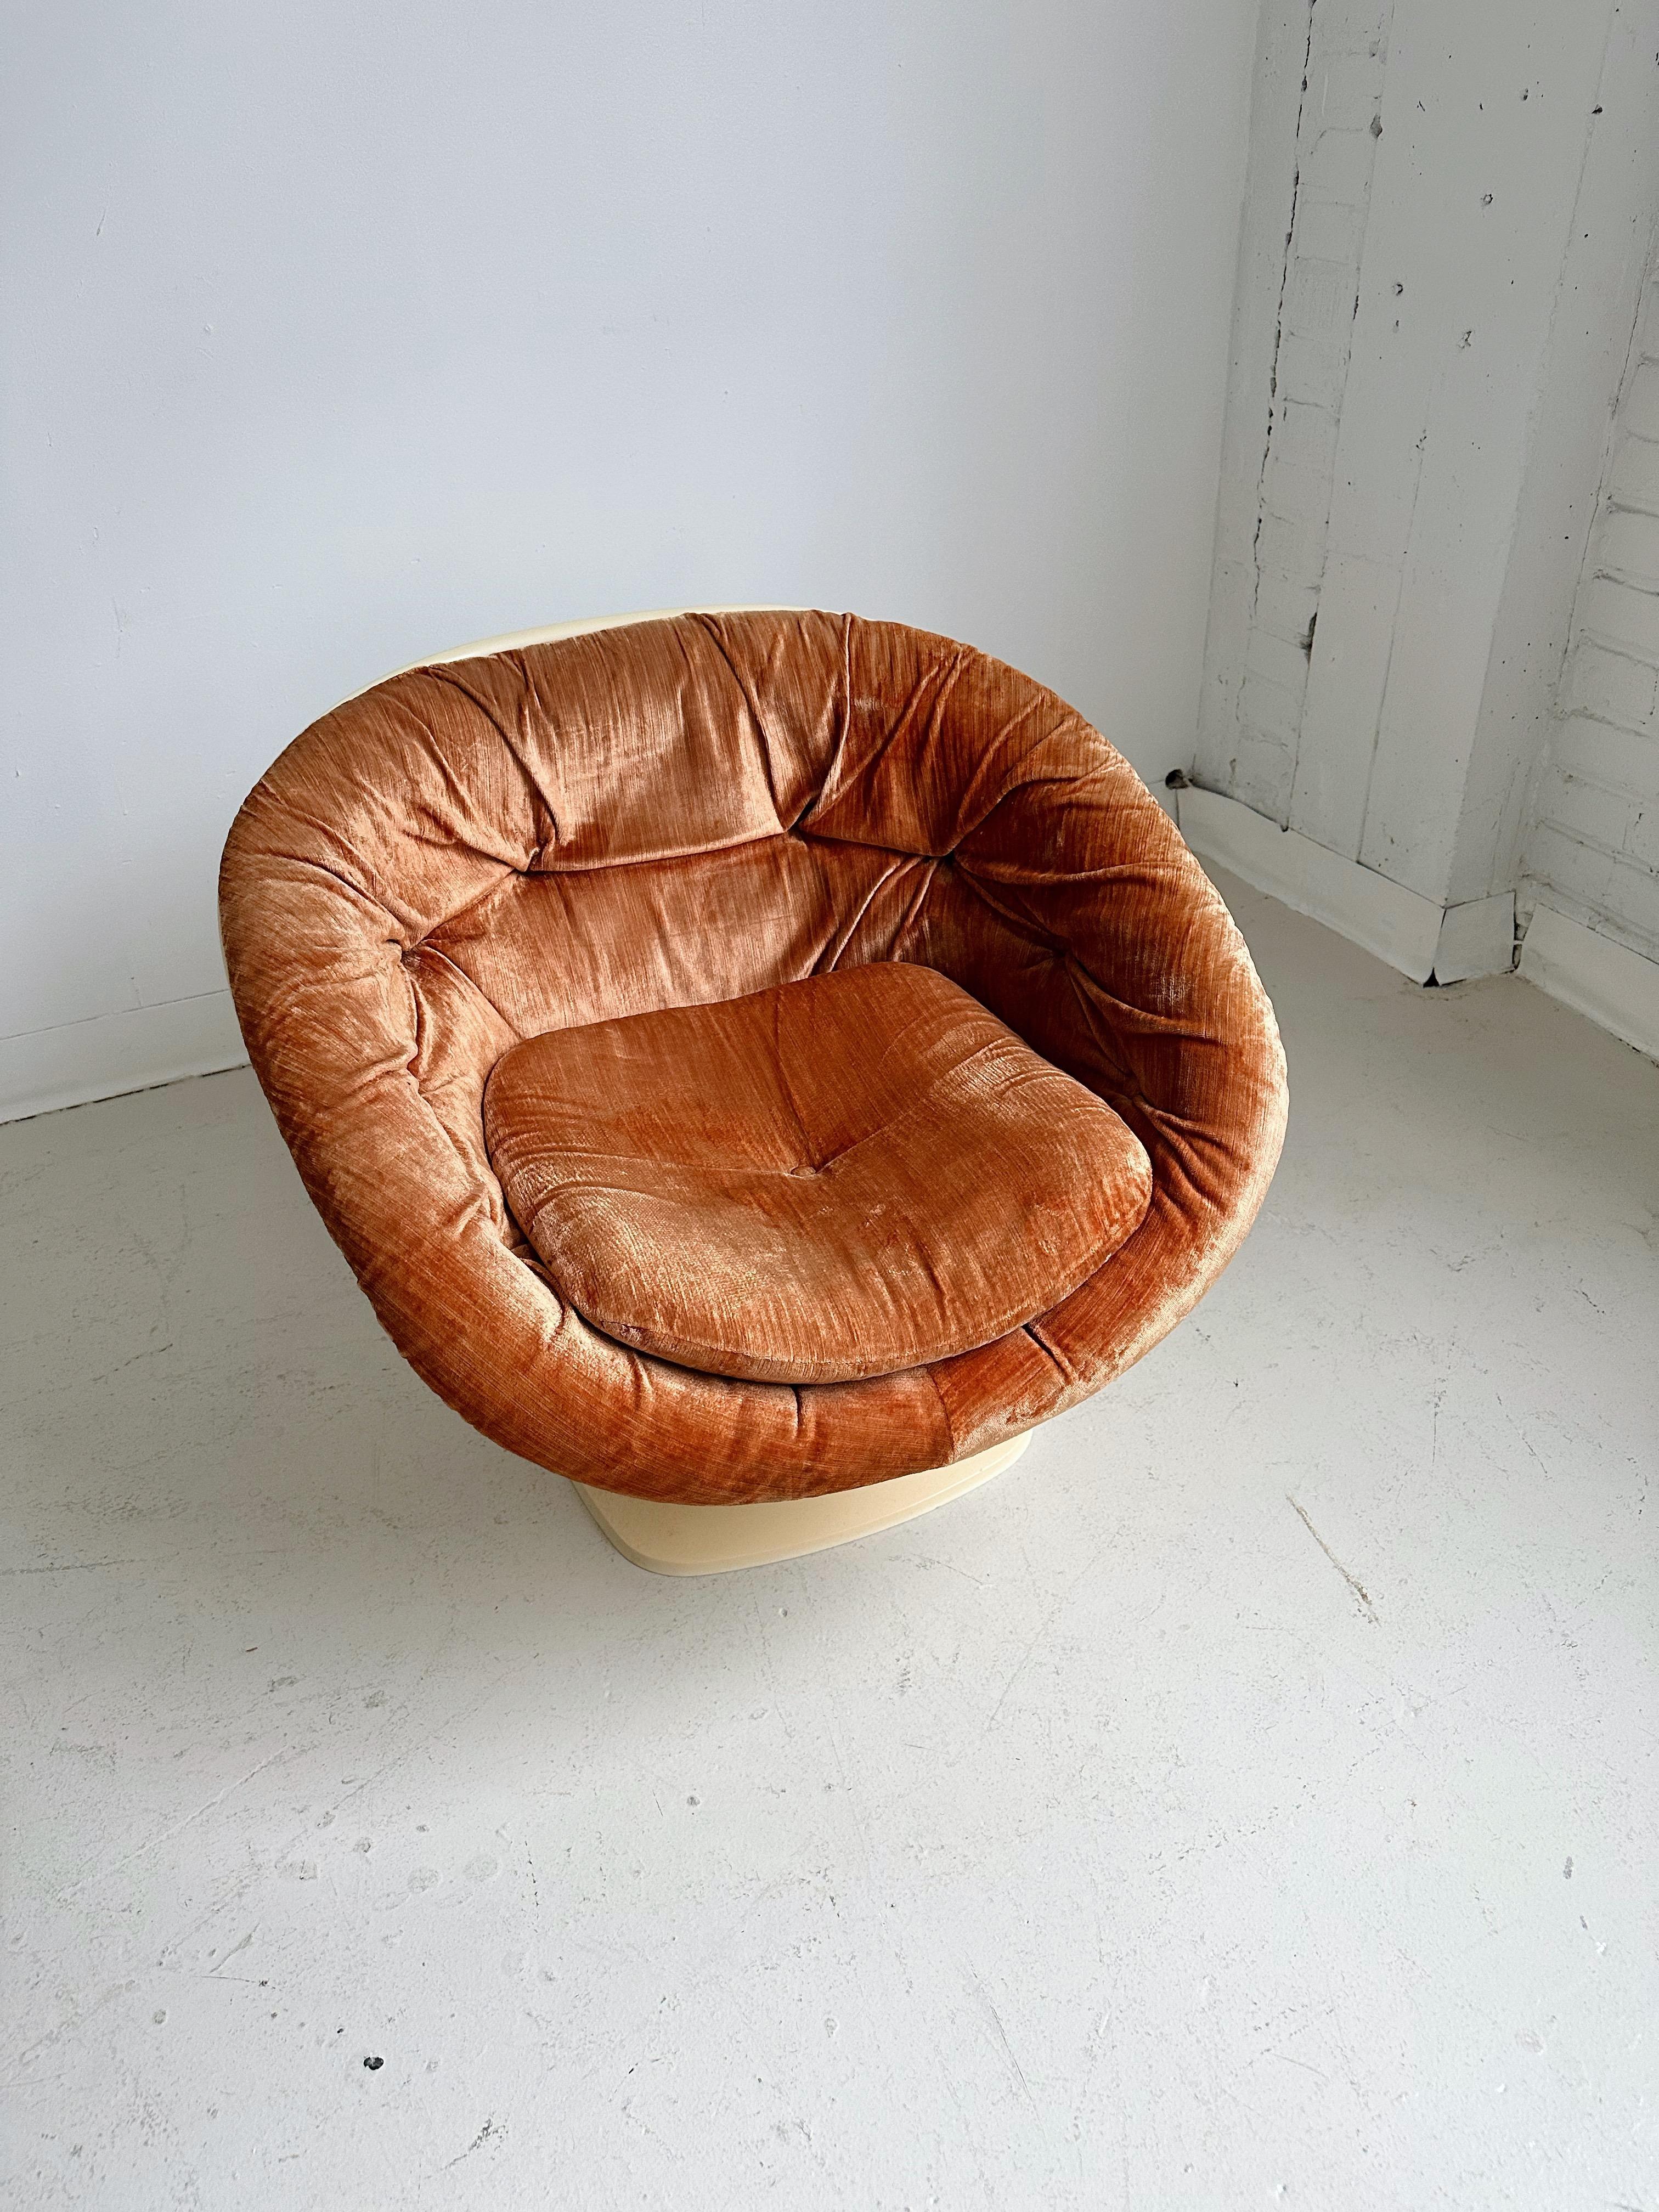 Space Age Club Chair by Raphael Raffel, 60's

Features a fibreglass tulip shape frame and terracotta velvet fabric 

//

Dimensions:

29”W x 28”D x 24”H  - seat height 14